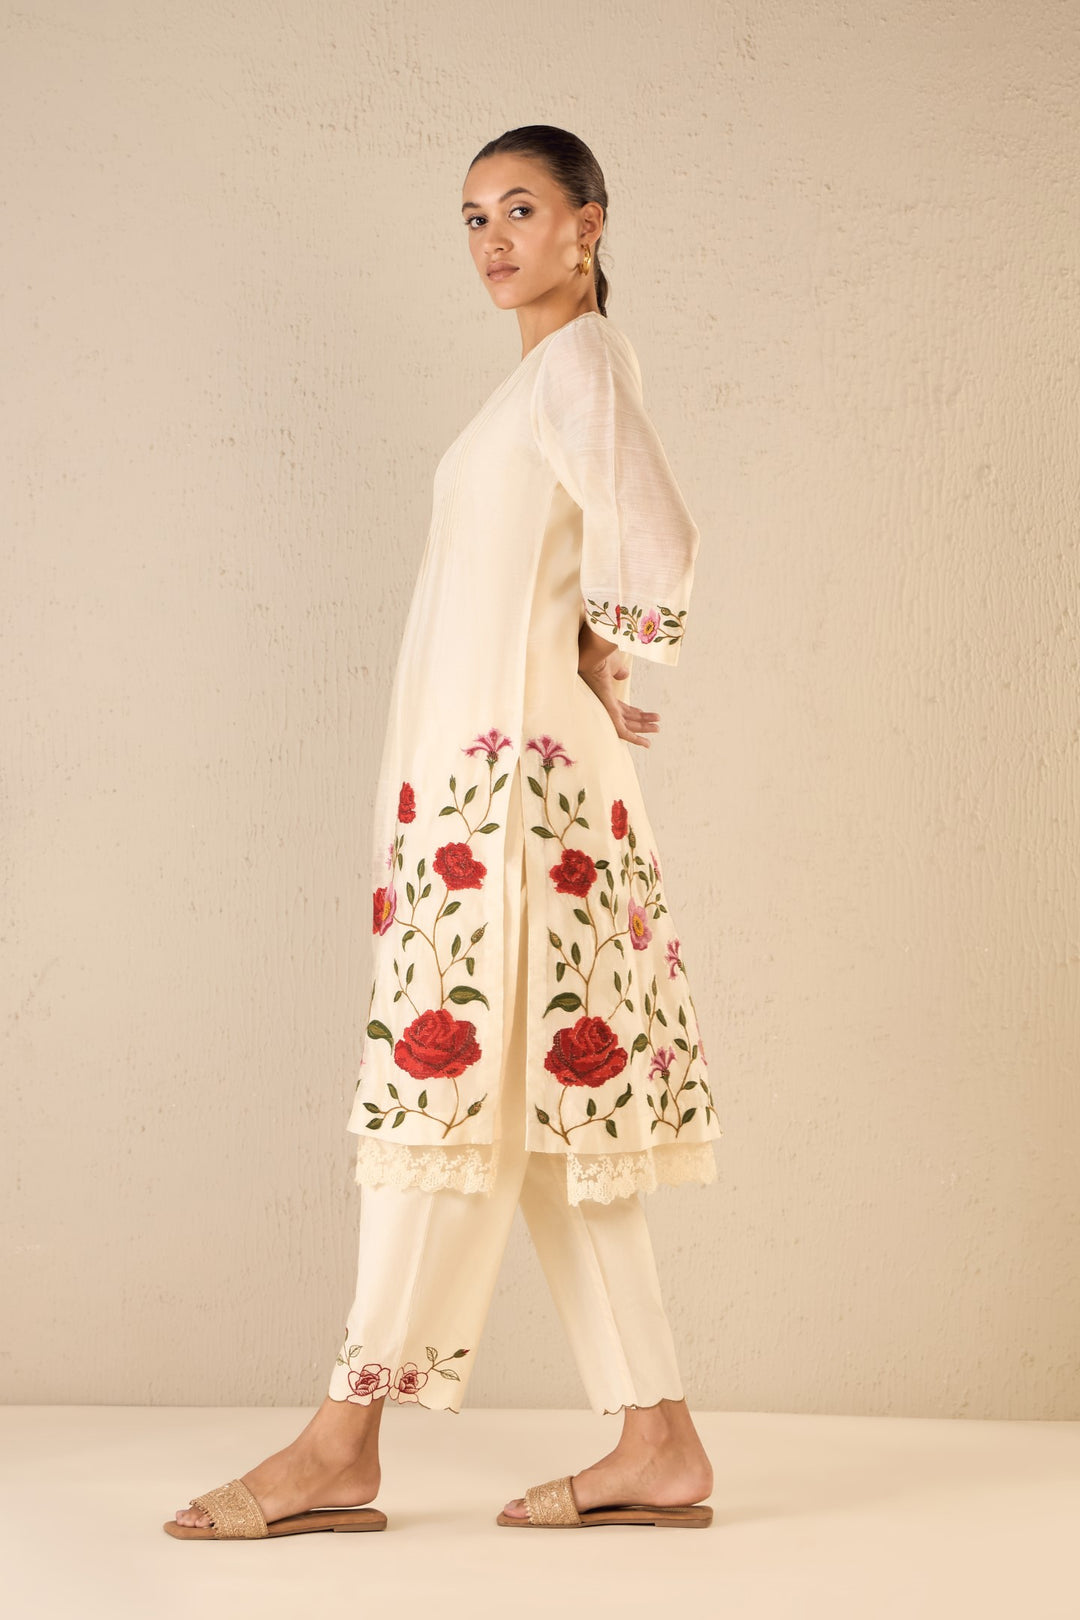 GARDENIA CHARM: IVORY FLORAL EMBRIODERY JAAL KURTA WITH IVORY EMBROIDERY SCALLOPED PANTS & IVORY CHANDERI FLORAL EMBROIDERY SCALLOPED DUPATTA